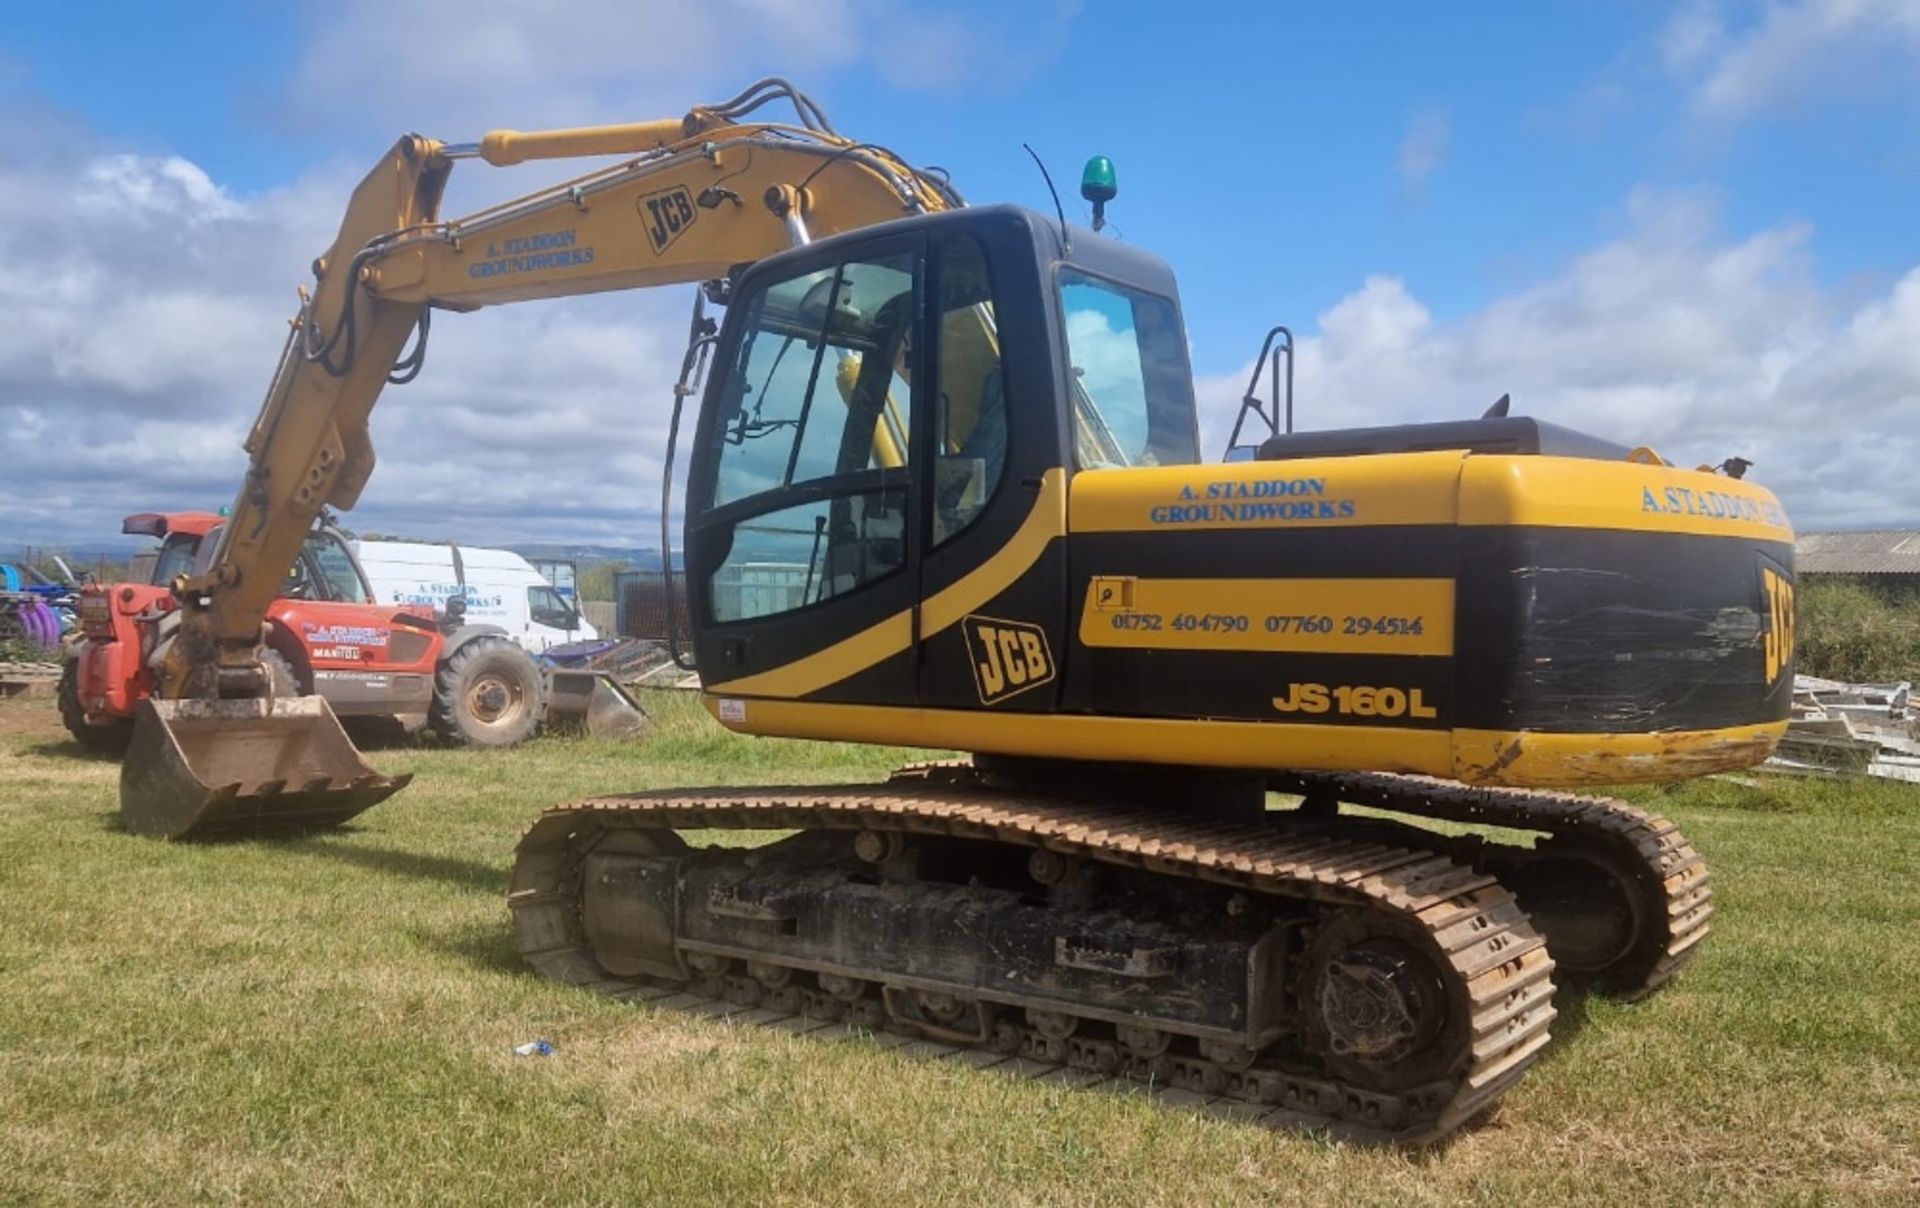 JCB JS160 EXCAVATOR 2001 10492HRS ,QUICK HITCH, PIPED, C.W RIDDLER BULKING & GRADING BUCKETS - Image 2 of 11